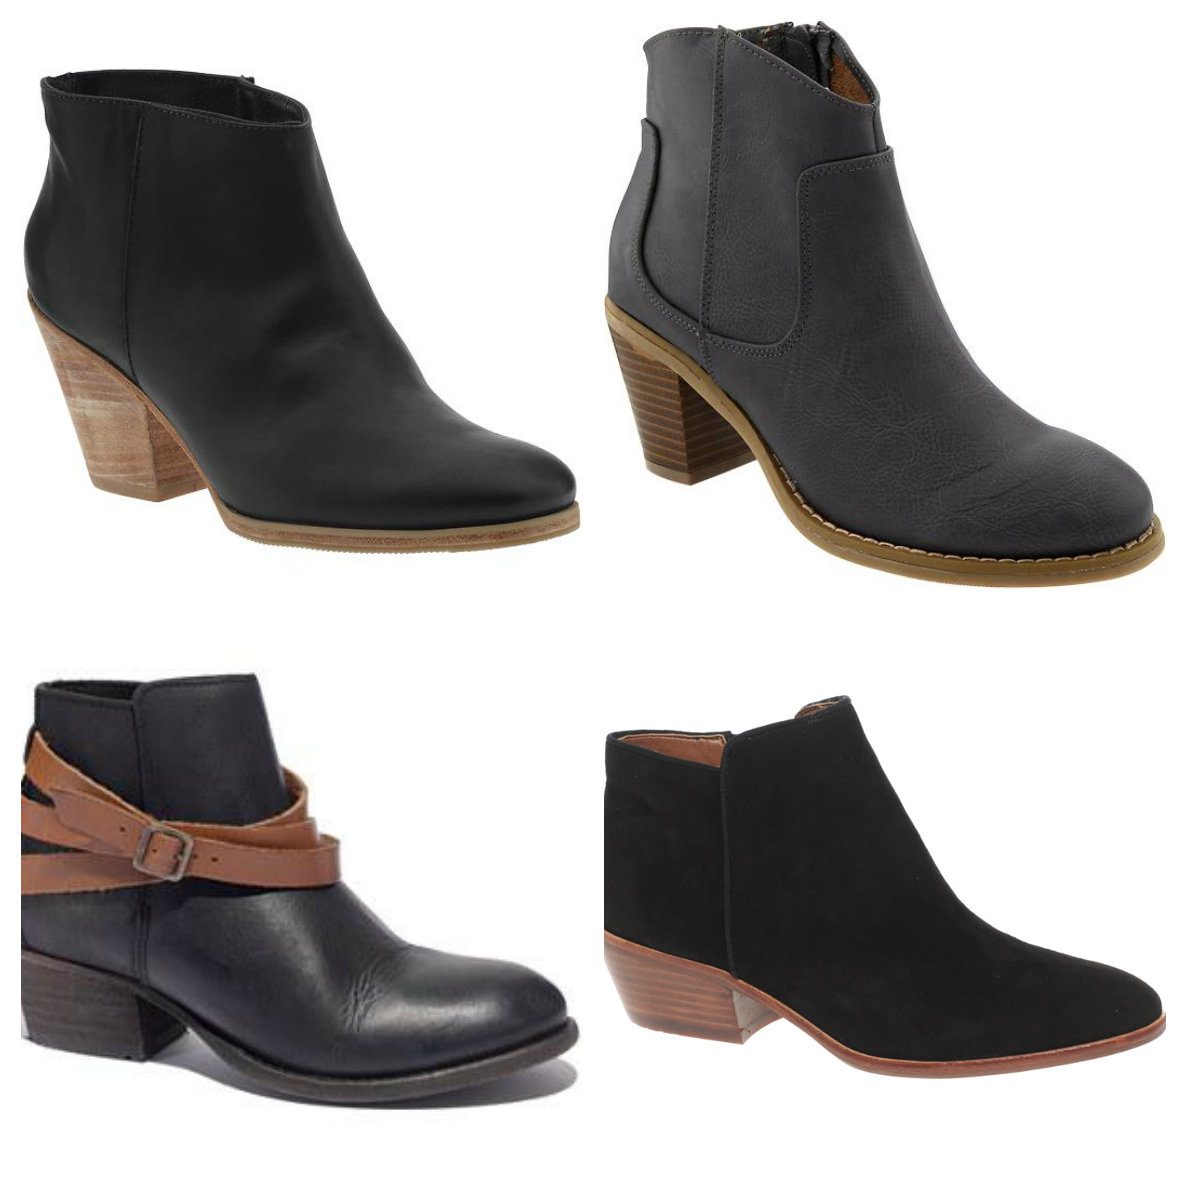 Favorite Ankle Boots for Fall - Hither and Thither